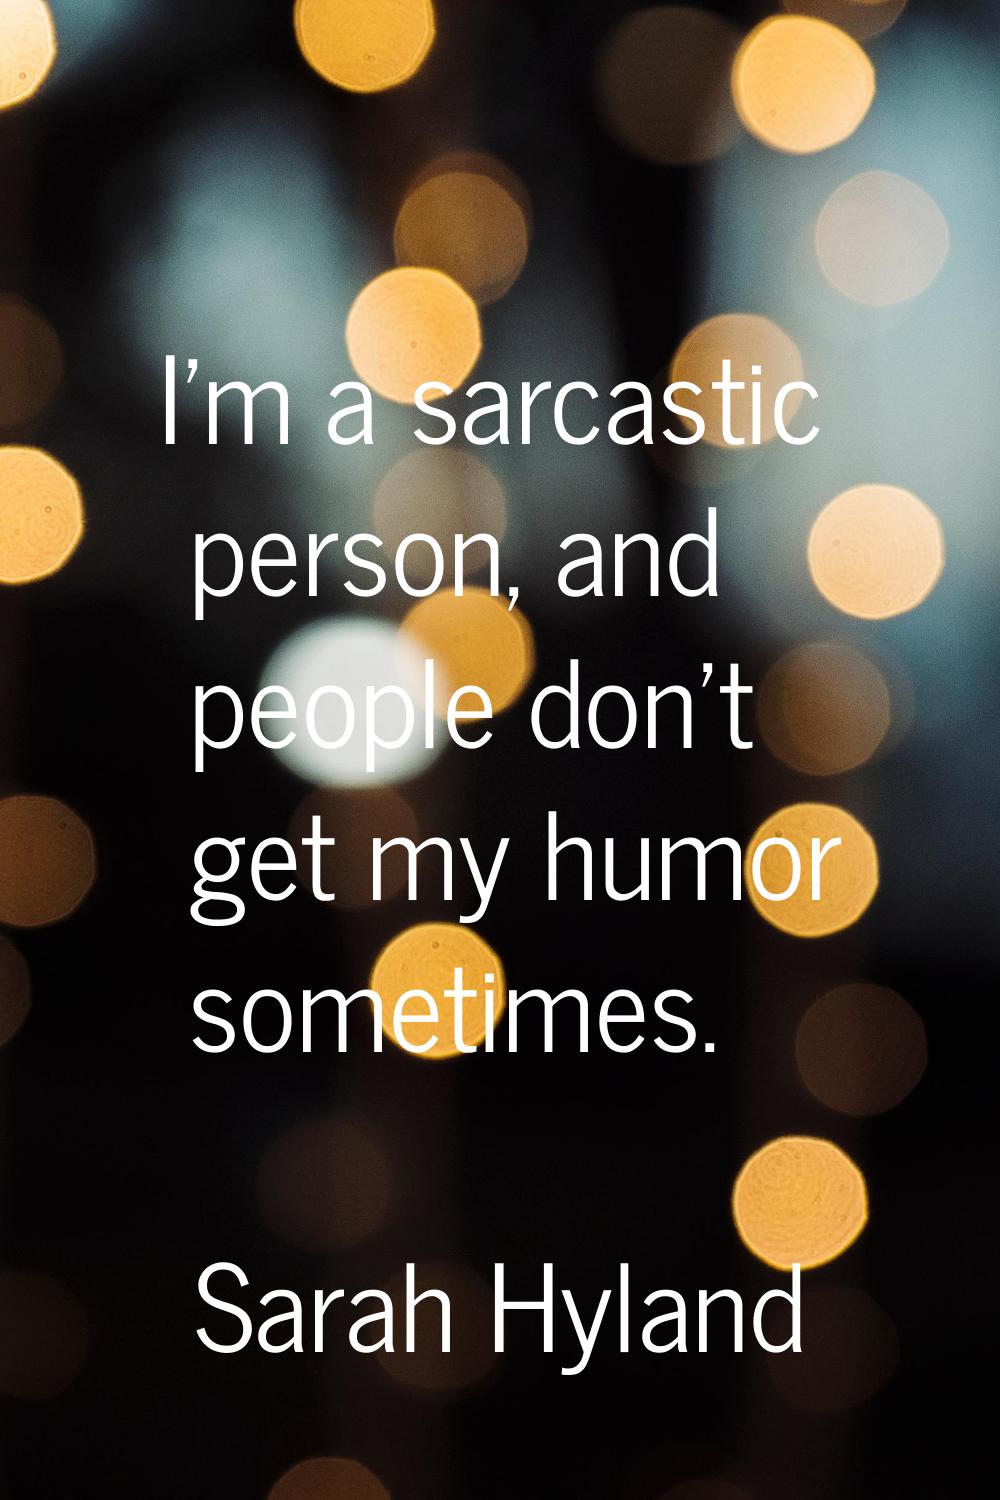 I'm a sarcastic person, and people don't get my humor sometimes.